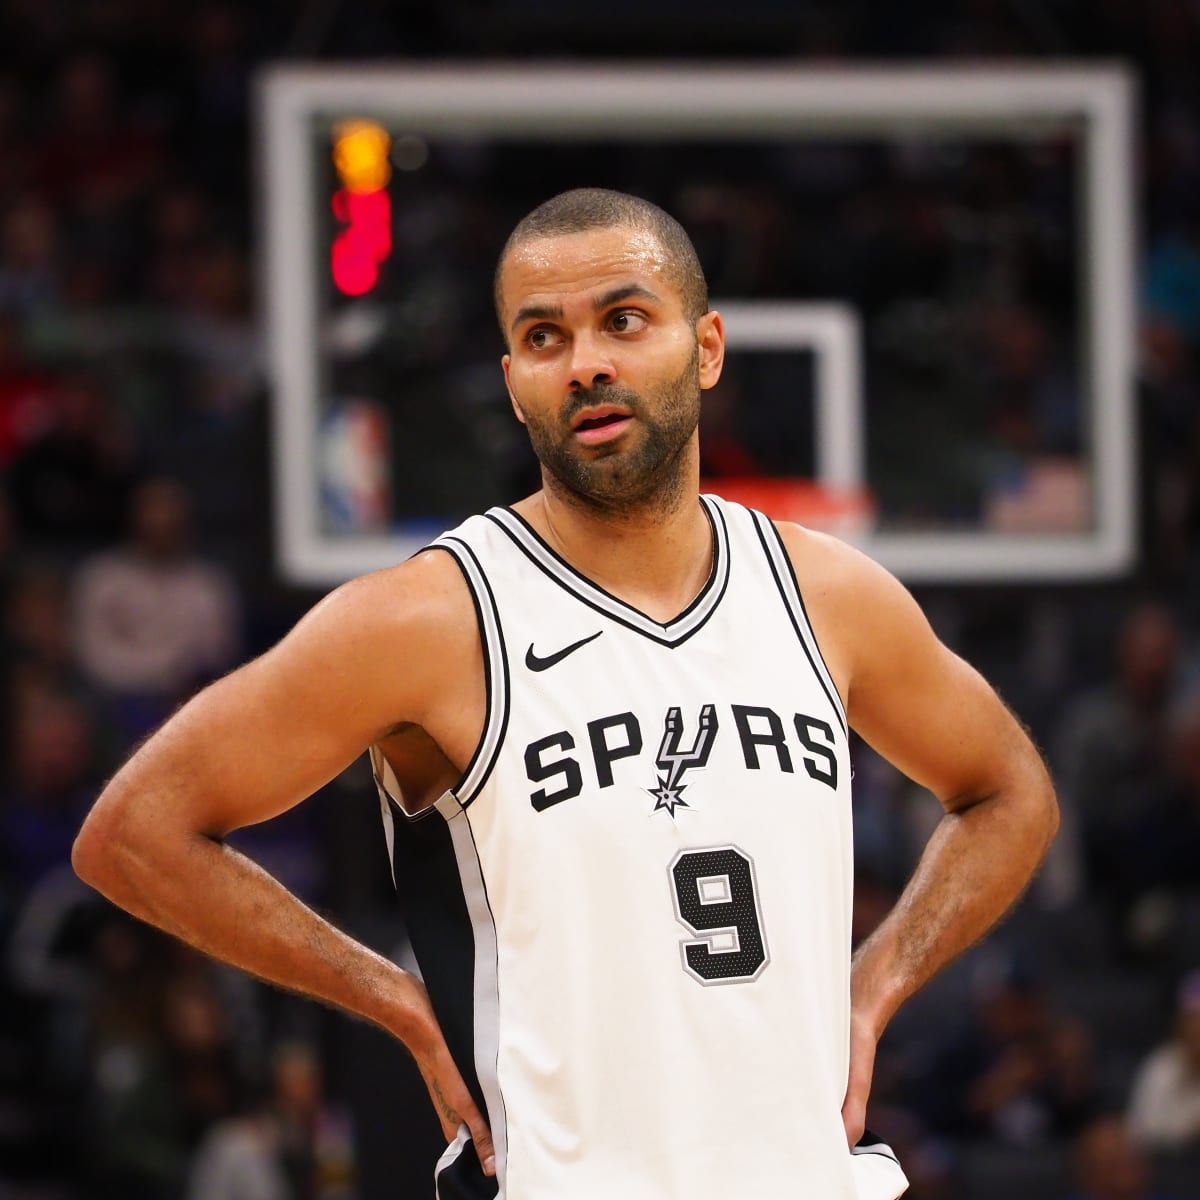 NBA players, coaches talk about Tony Parker on his jersey retirement night